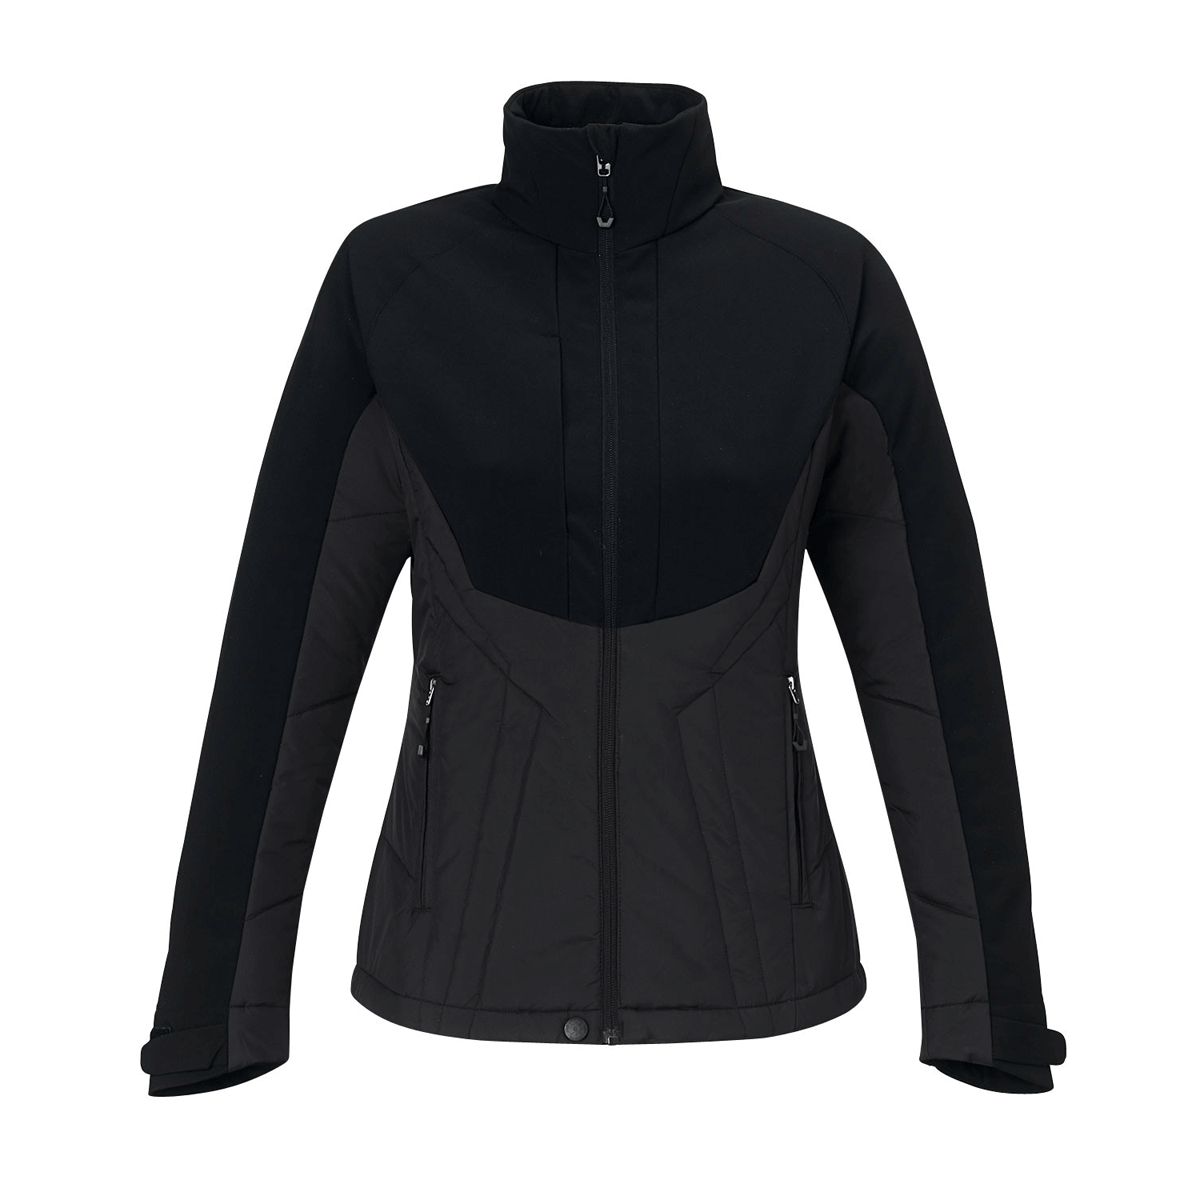 NORTH END LADIES INNOVATE INSULATED HYBRID SOFT SHELL JACKET